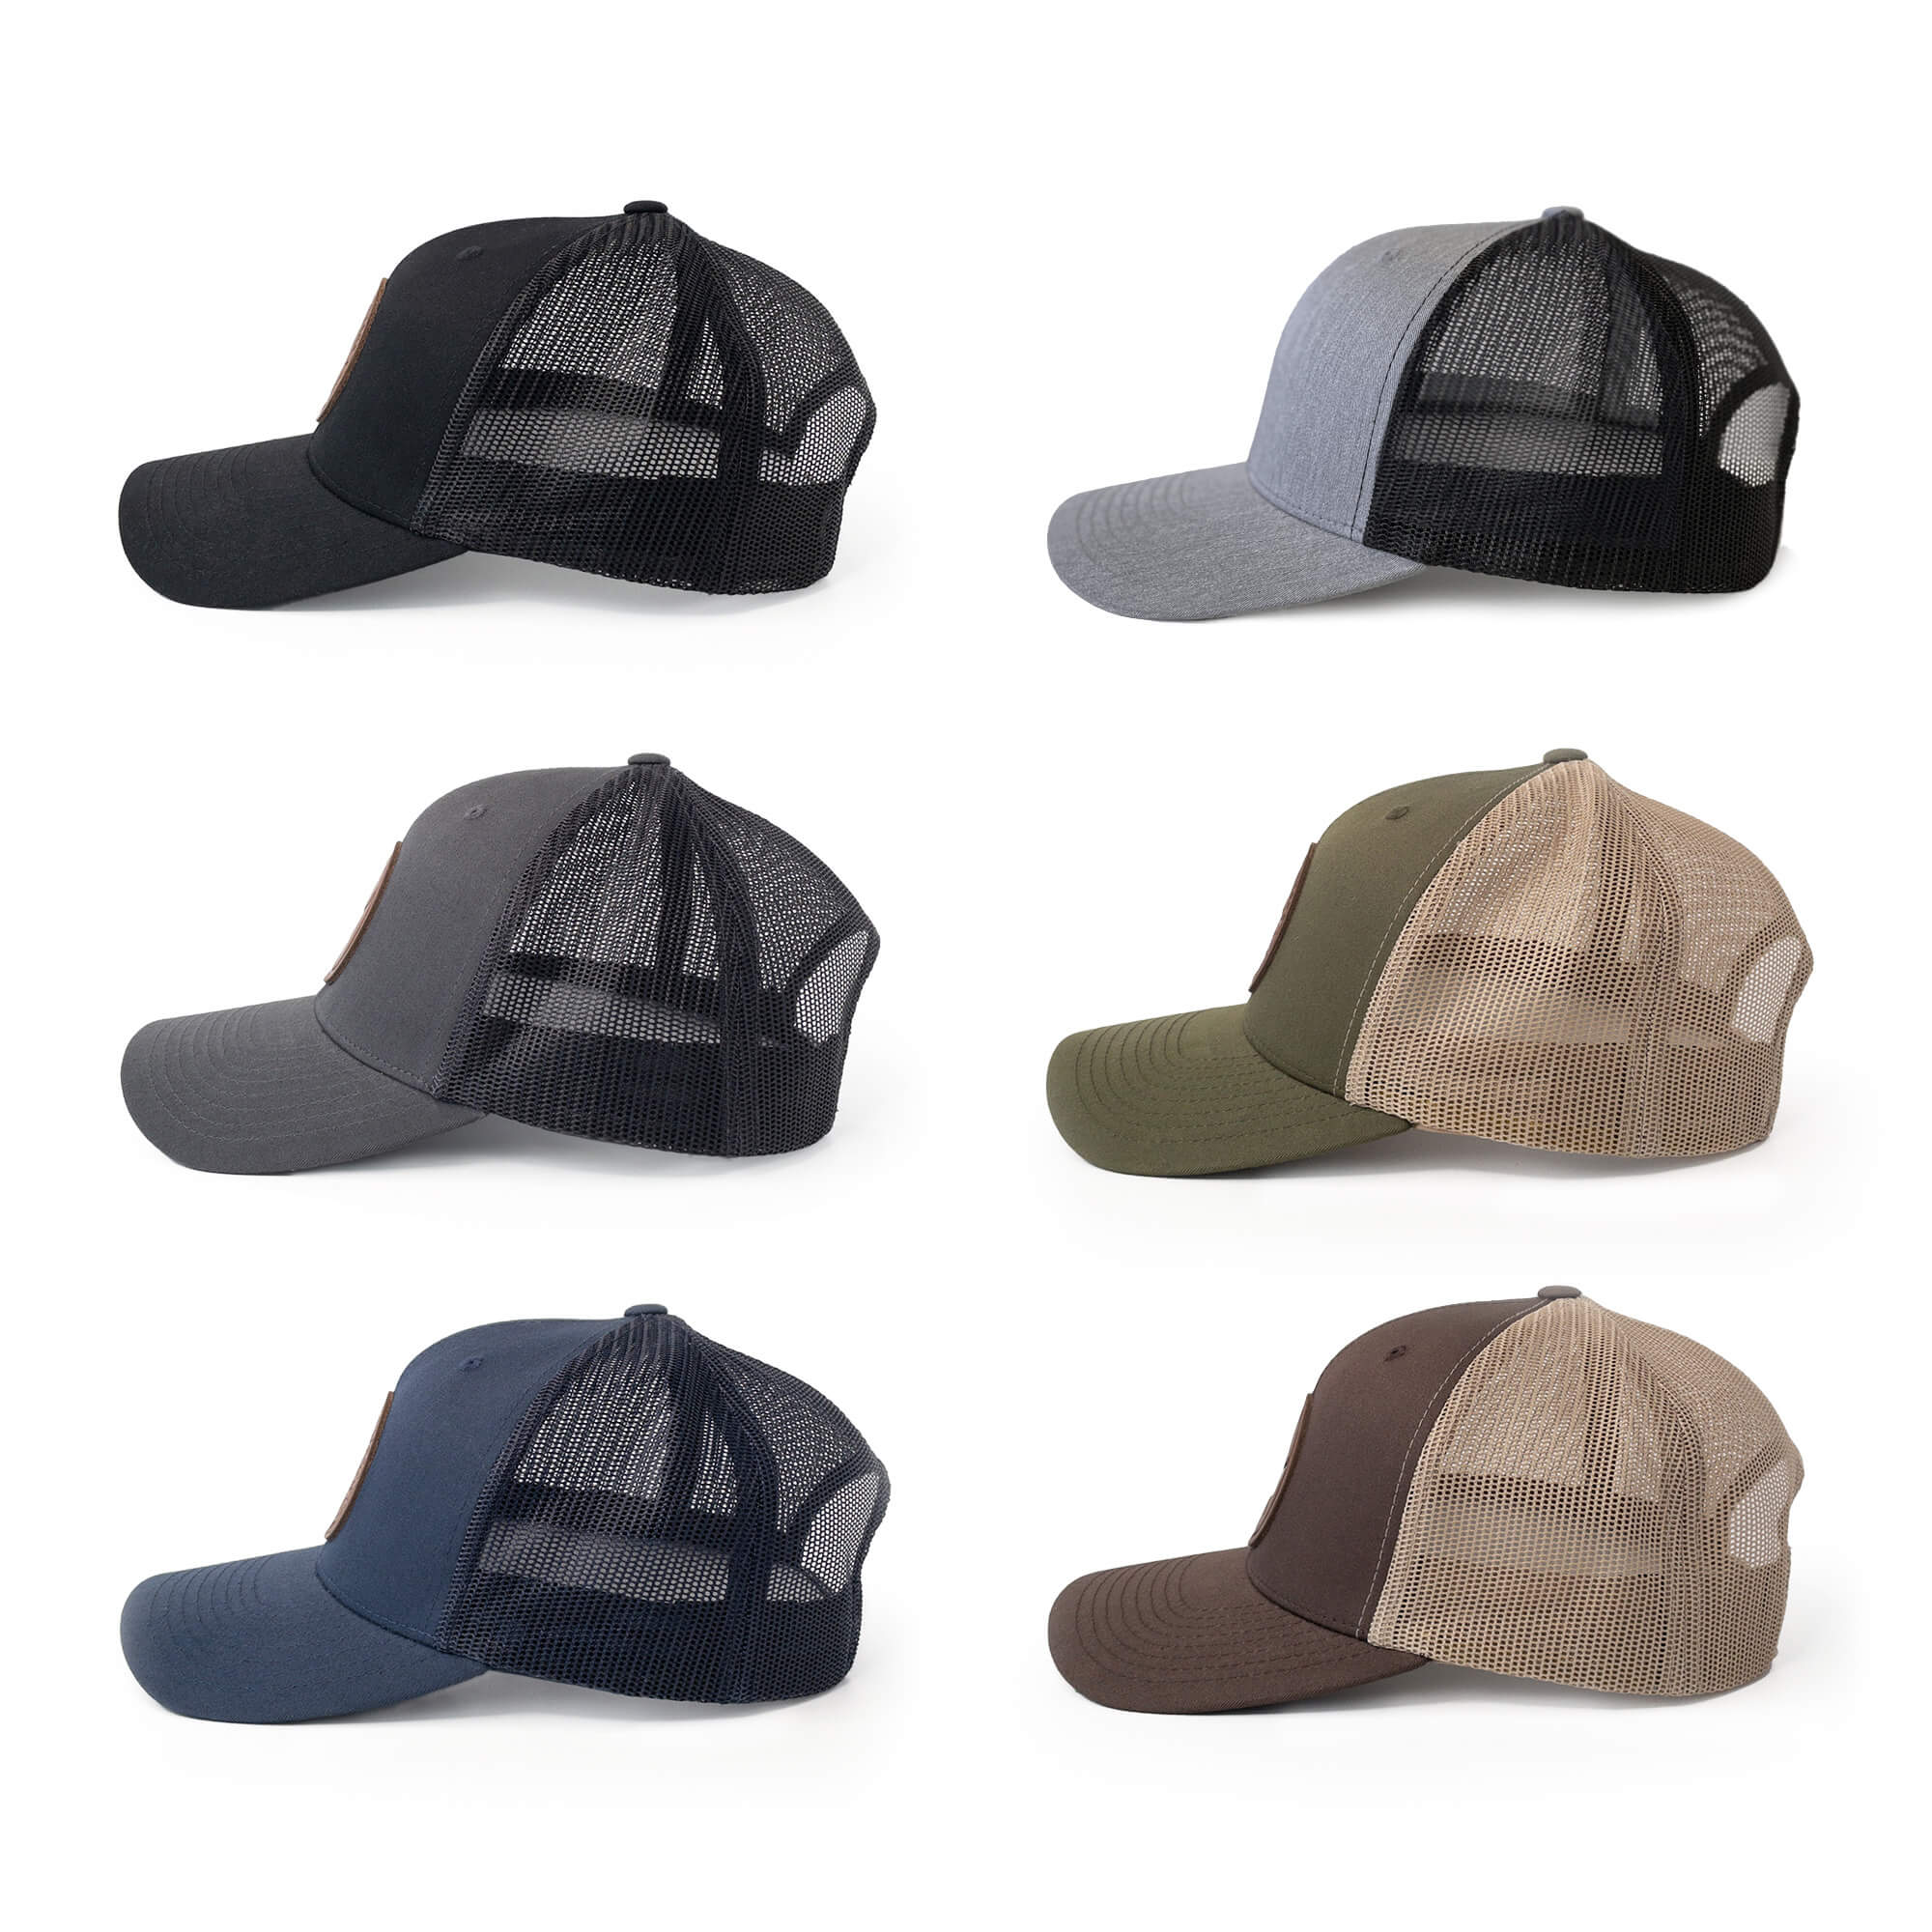 Leather patch trucker hats available in 6 colors | BLACK-002-003, CHARC-002-003, NAVY-002-003, HGREY-002-003, MOSS-002-003, BROWN-002-003